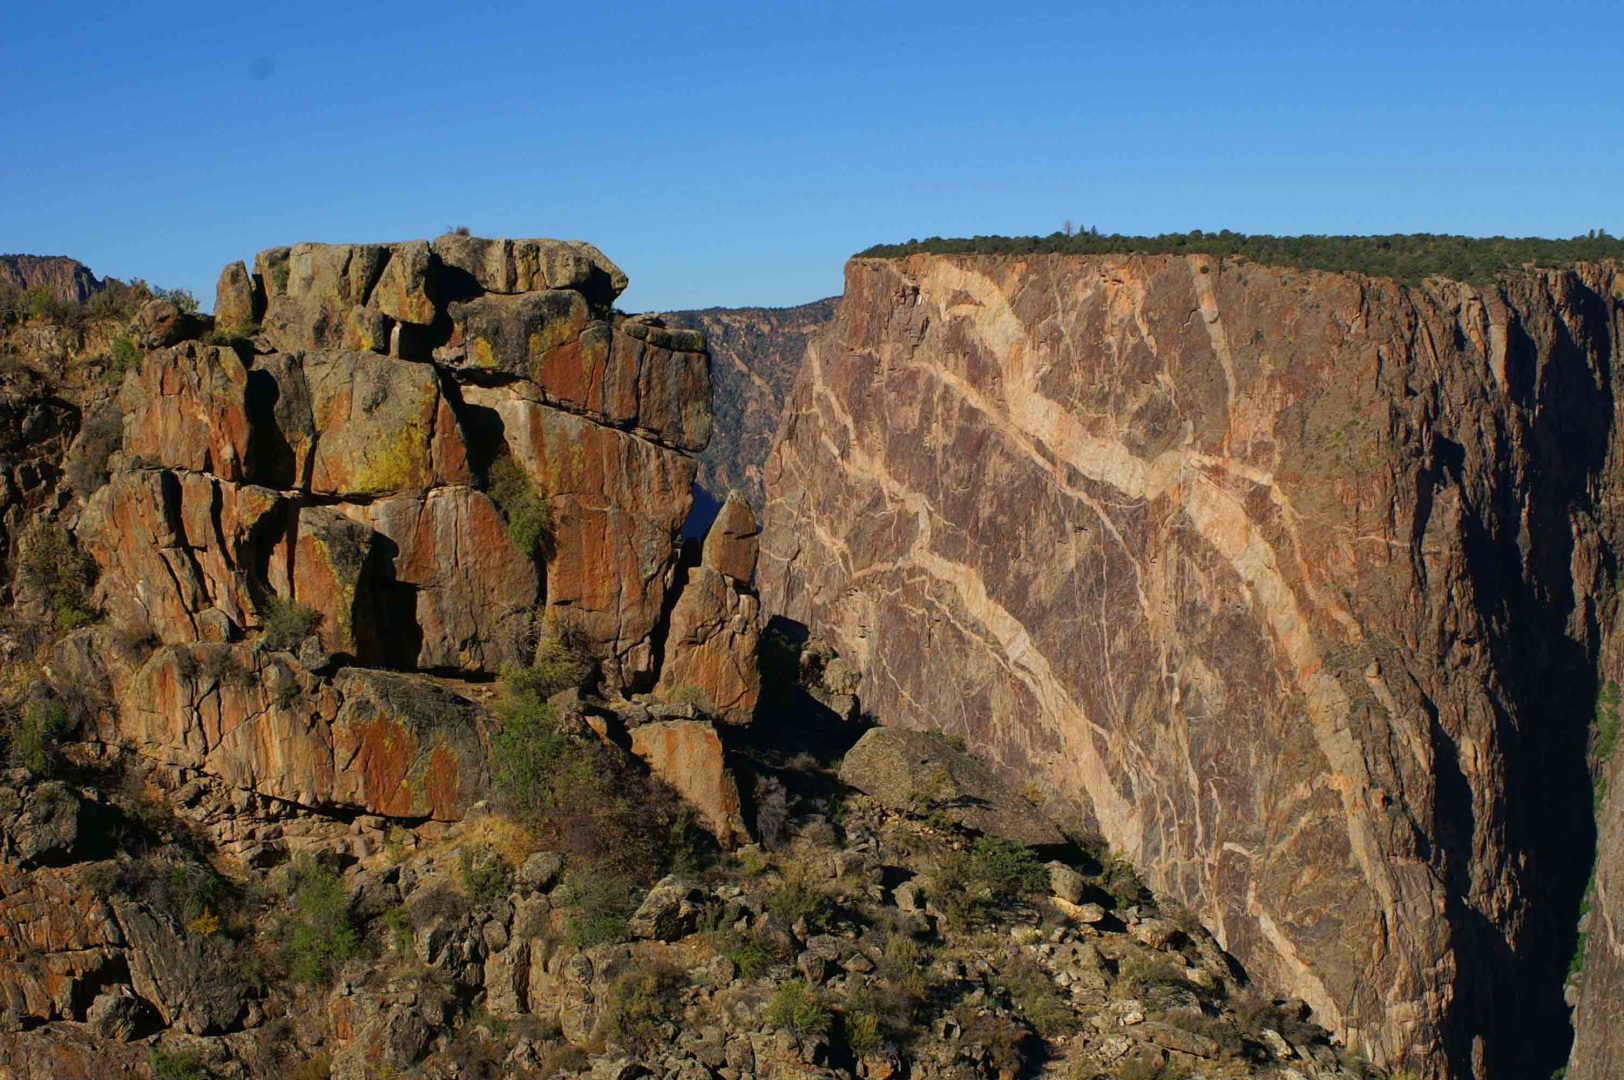 The Painted Wall at Black Canyon of the Gunnison National Park